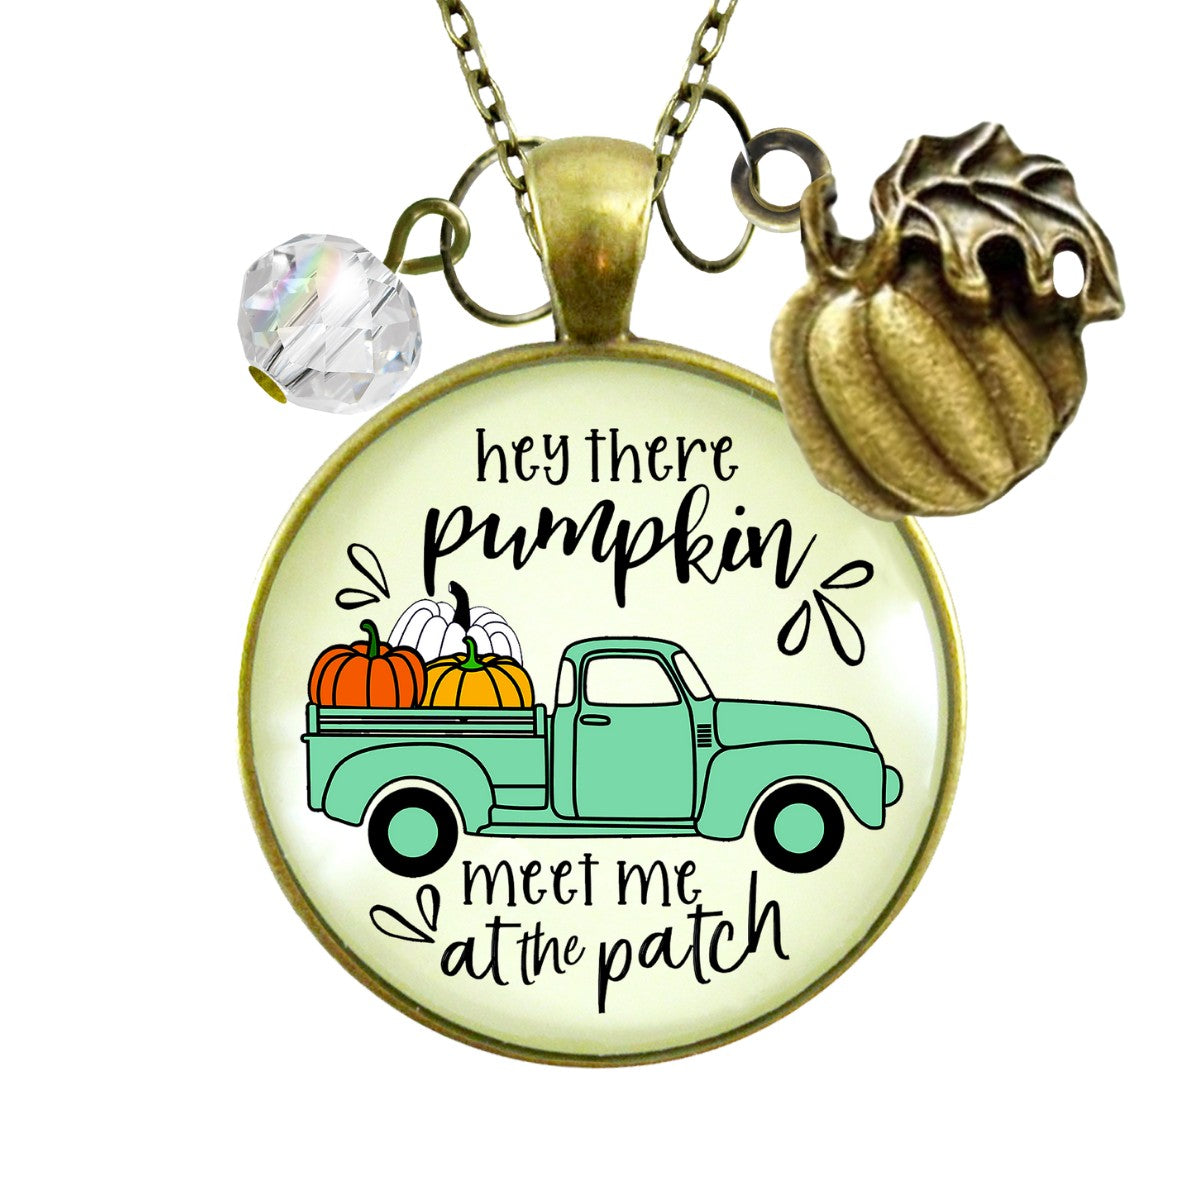 Hey There Pumpkin Necklace Meet Me At The Patch Autumn Theme Jewelry October Truck Pendant For Women  Necklace - Gutsy Goodness Handmade Jewelry